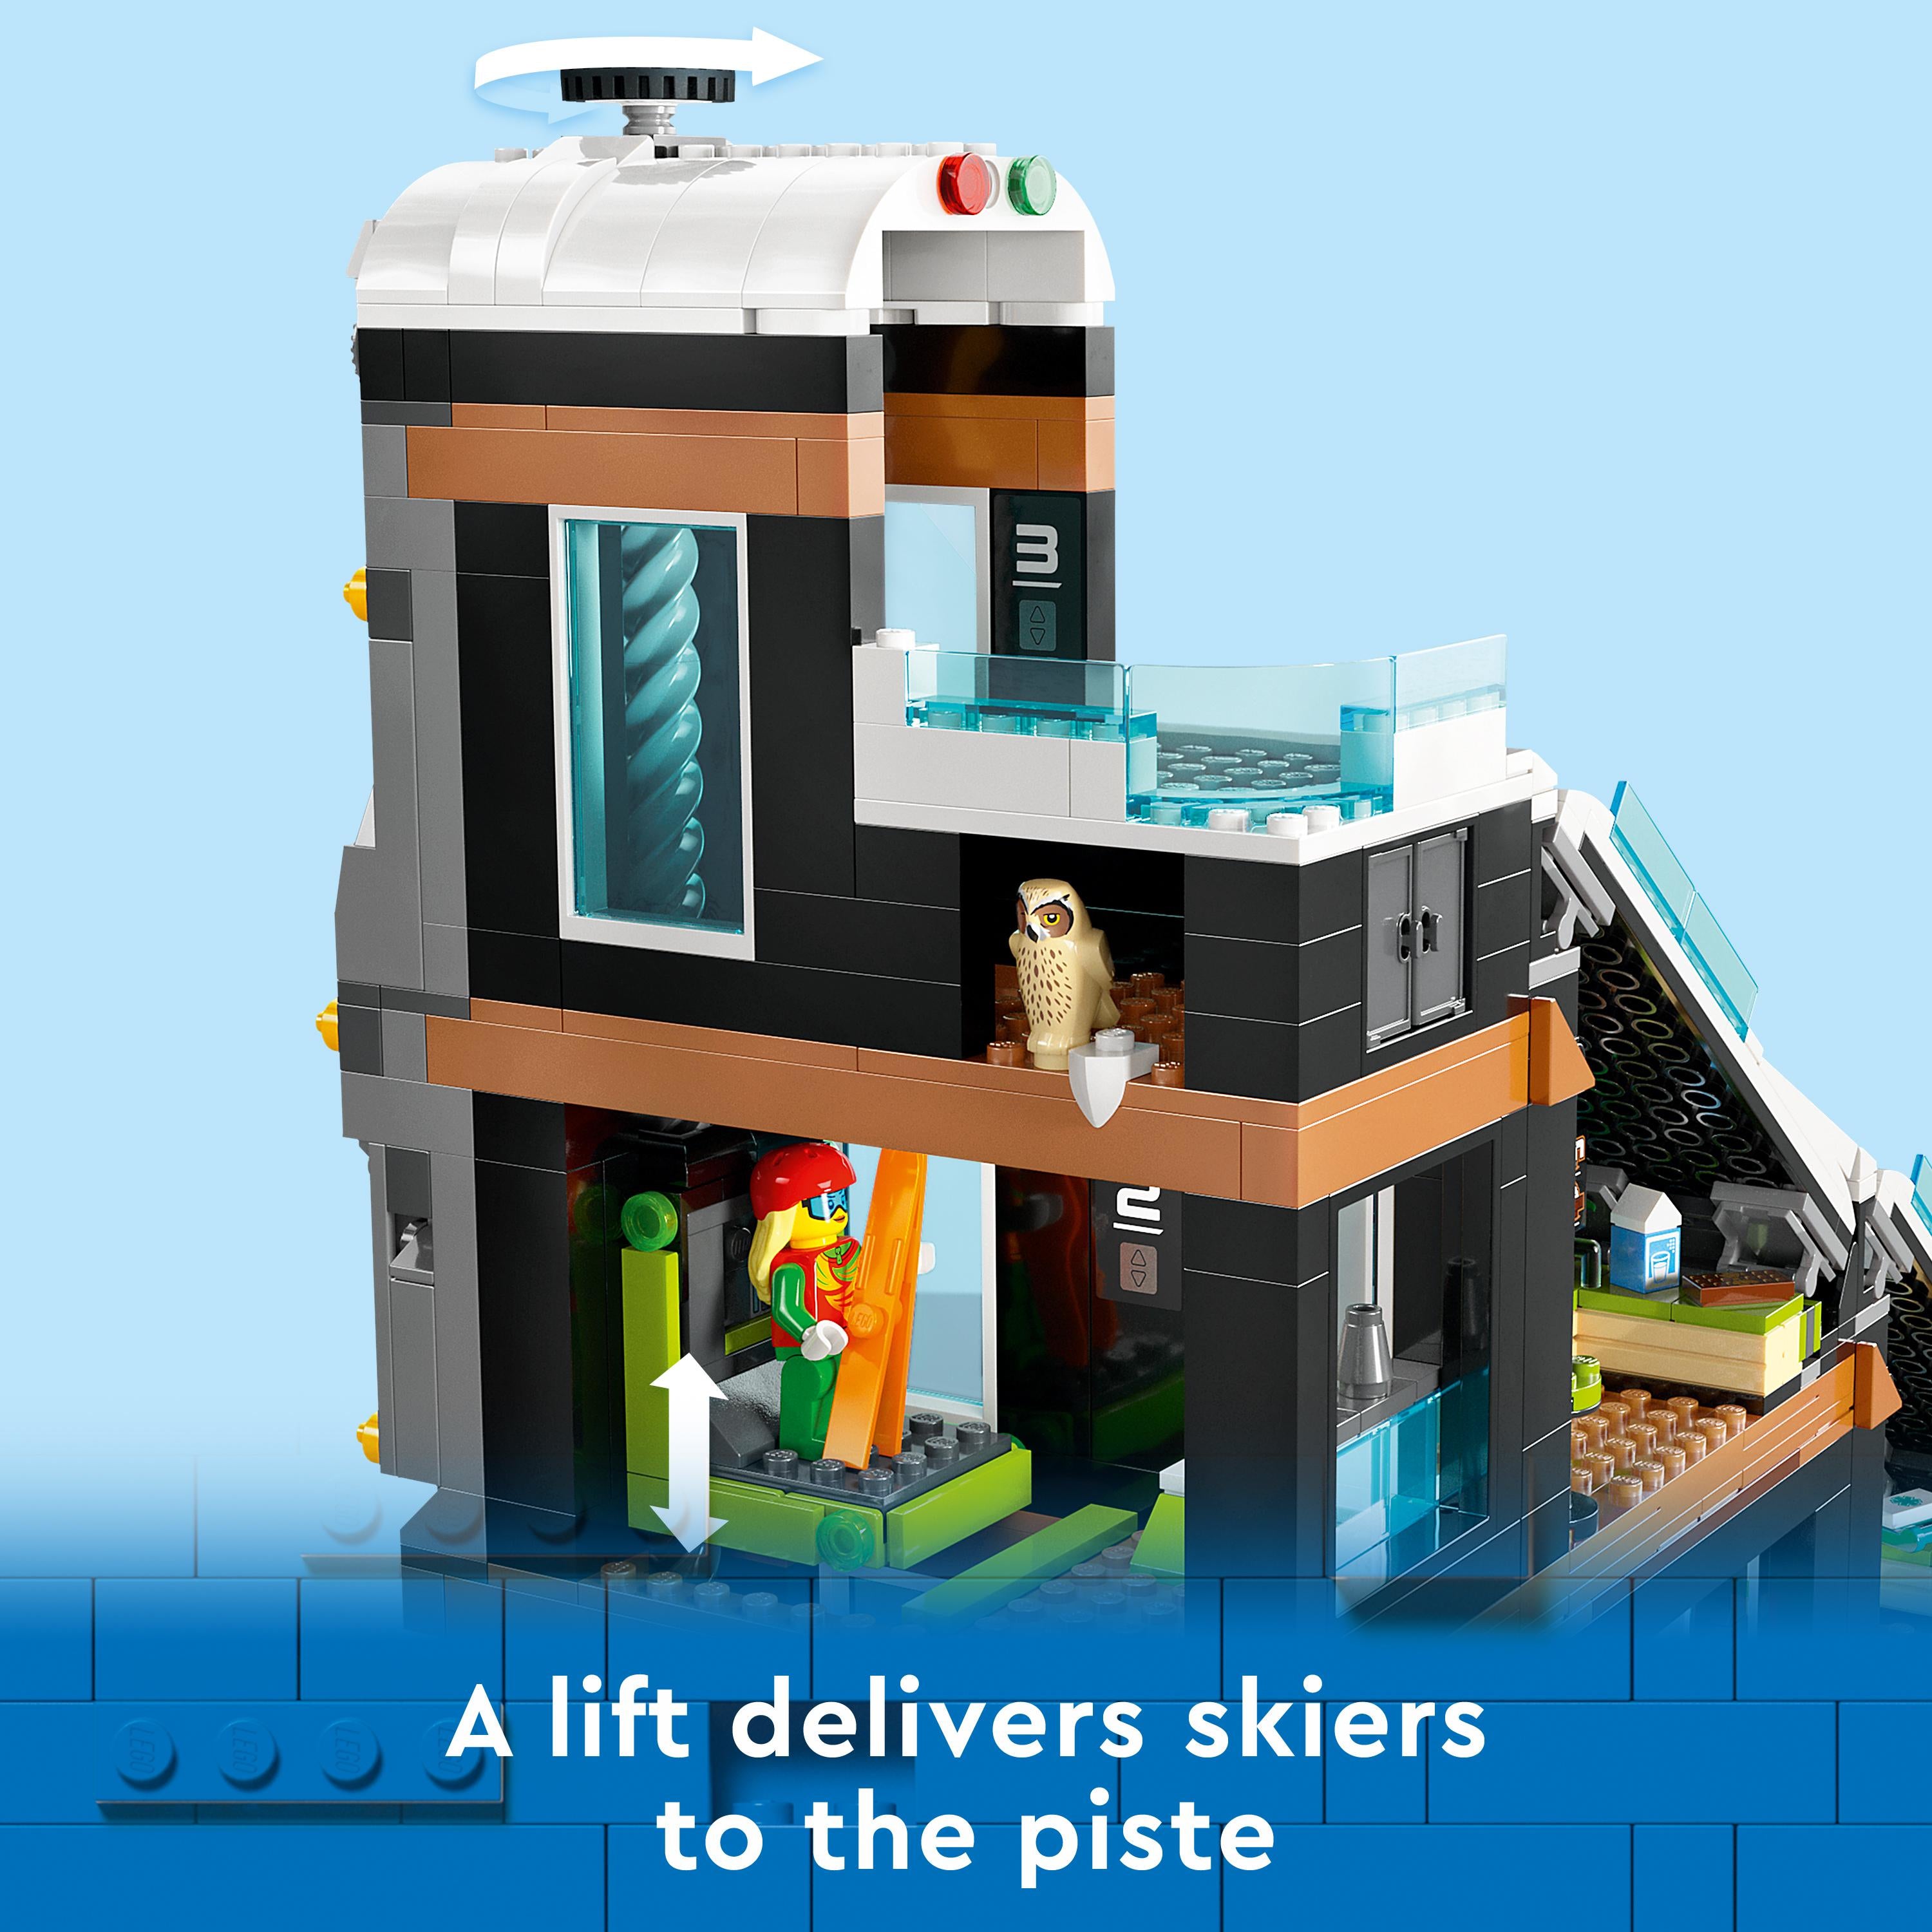 LEGO 60366 City Ski and Climbing Centre Set, 3-Level Modular Building with Slope, Winter Sports Shop, Café, Ski Lift and 8 Minifigures, Gift Toys for Kids, Boys, Girls 7+ Years Old